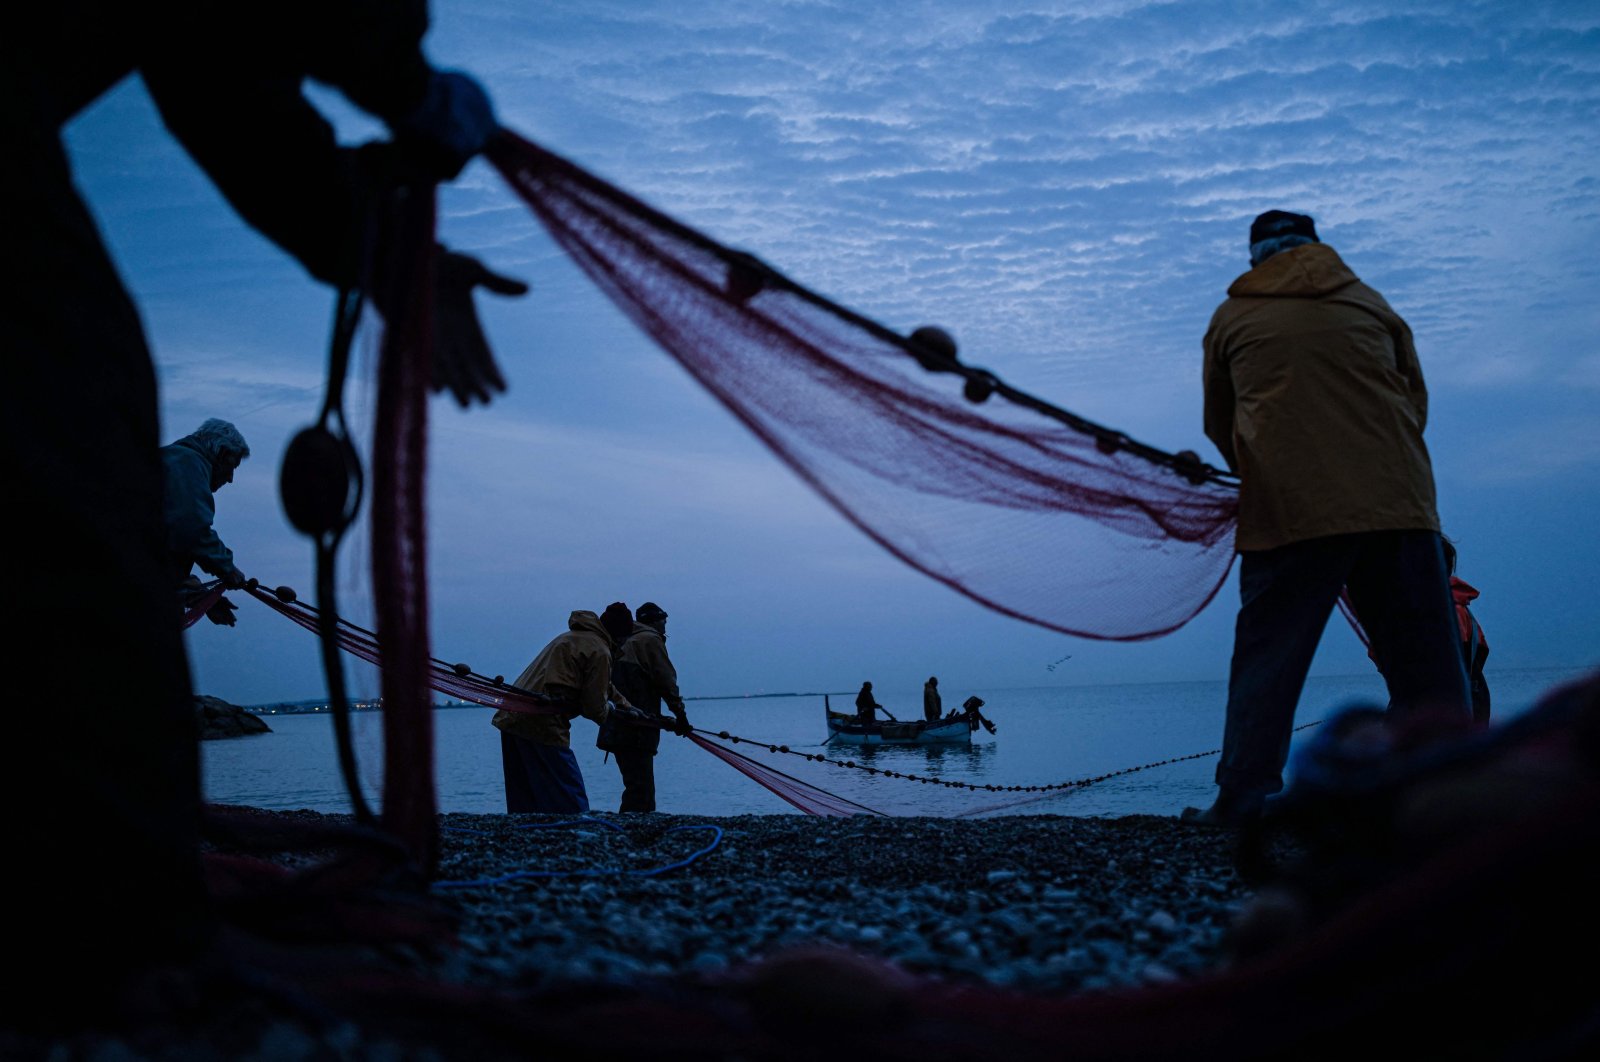 Fishermen take part in the traditional Poutine fishing in Cagnes-sur-Mer, southeastern France, March 29, 2022. (AFP Photo)